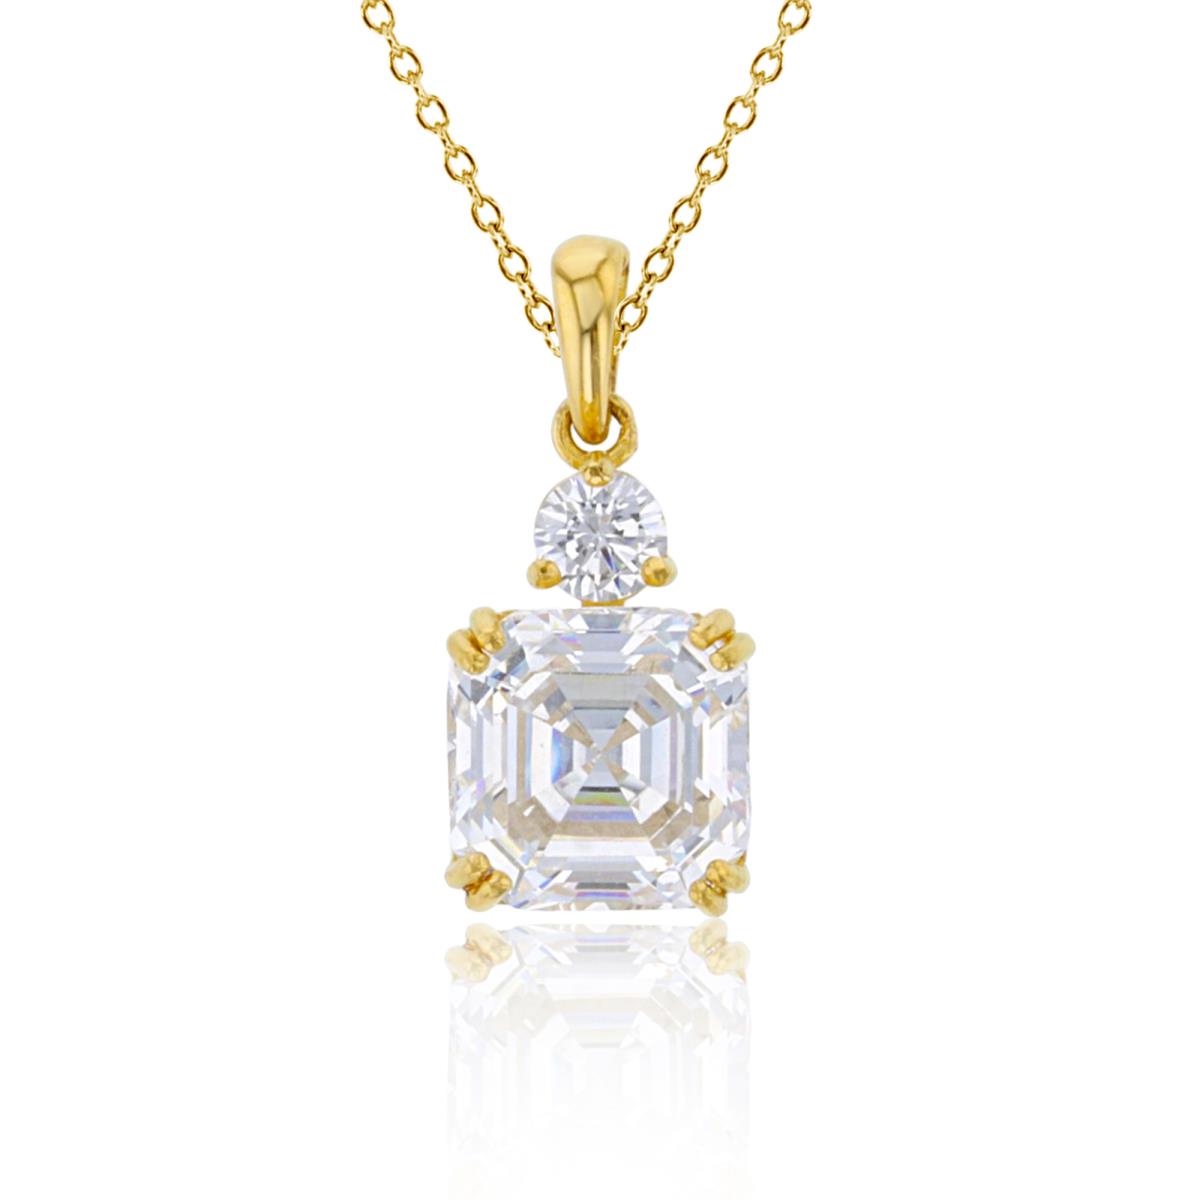 10K Yellow Gold 8mm Cush & 3.5mm Rnd White CZ Solitaire 18"Necklace